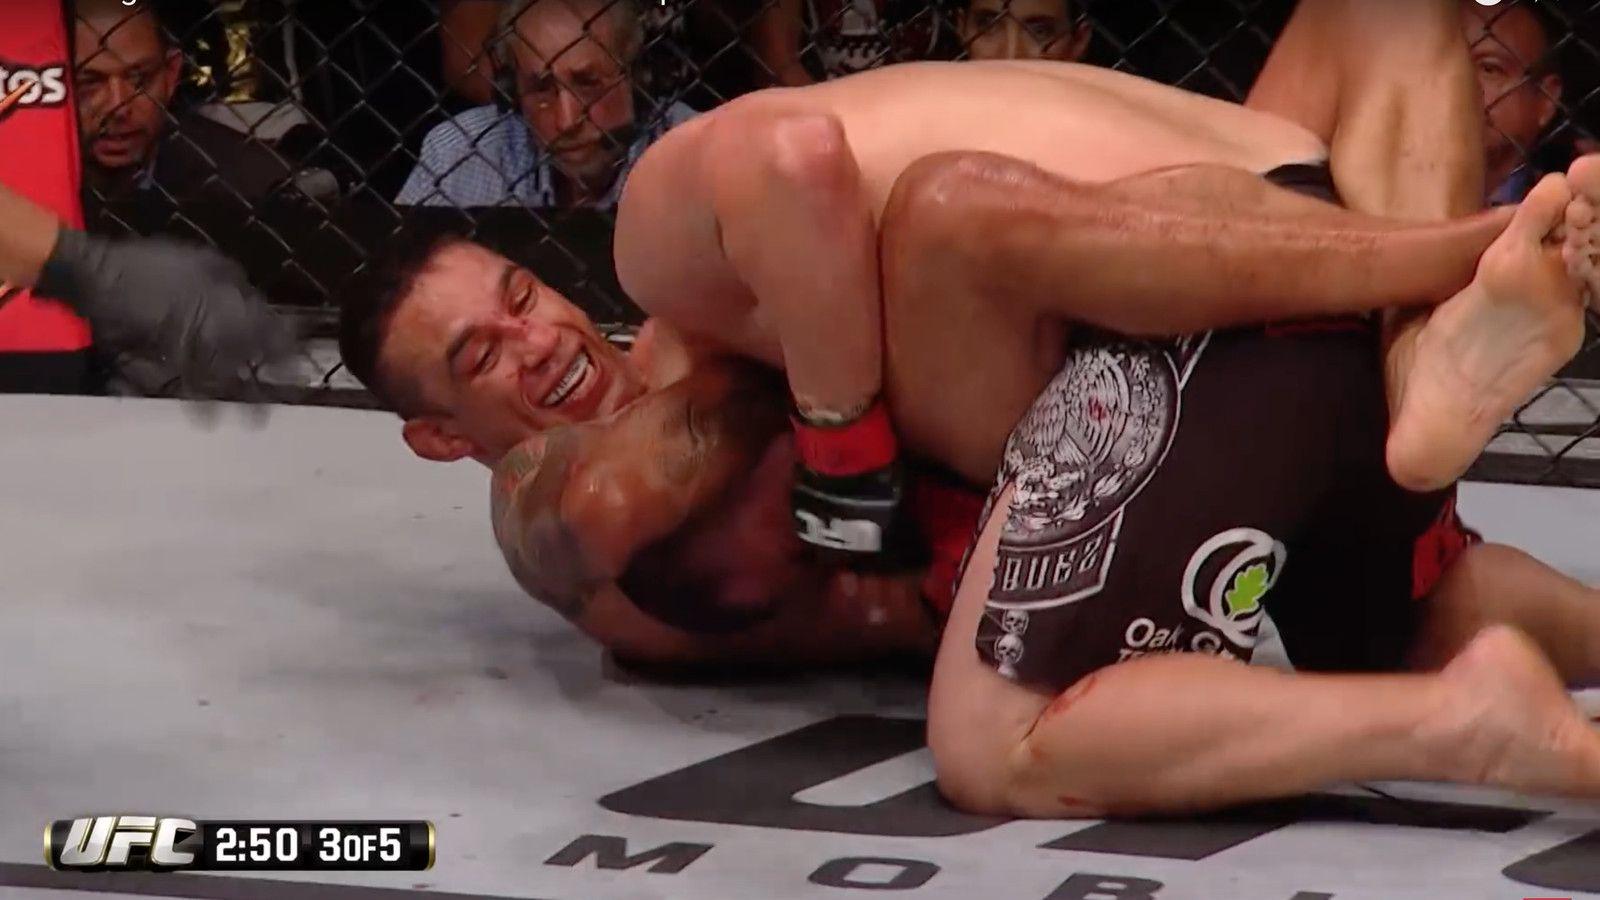 Fabricio Werdum submits Cain Velasquez to become the UFC Heavyweight champion. Credit: MMA Fighting.